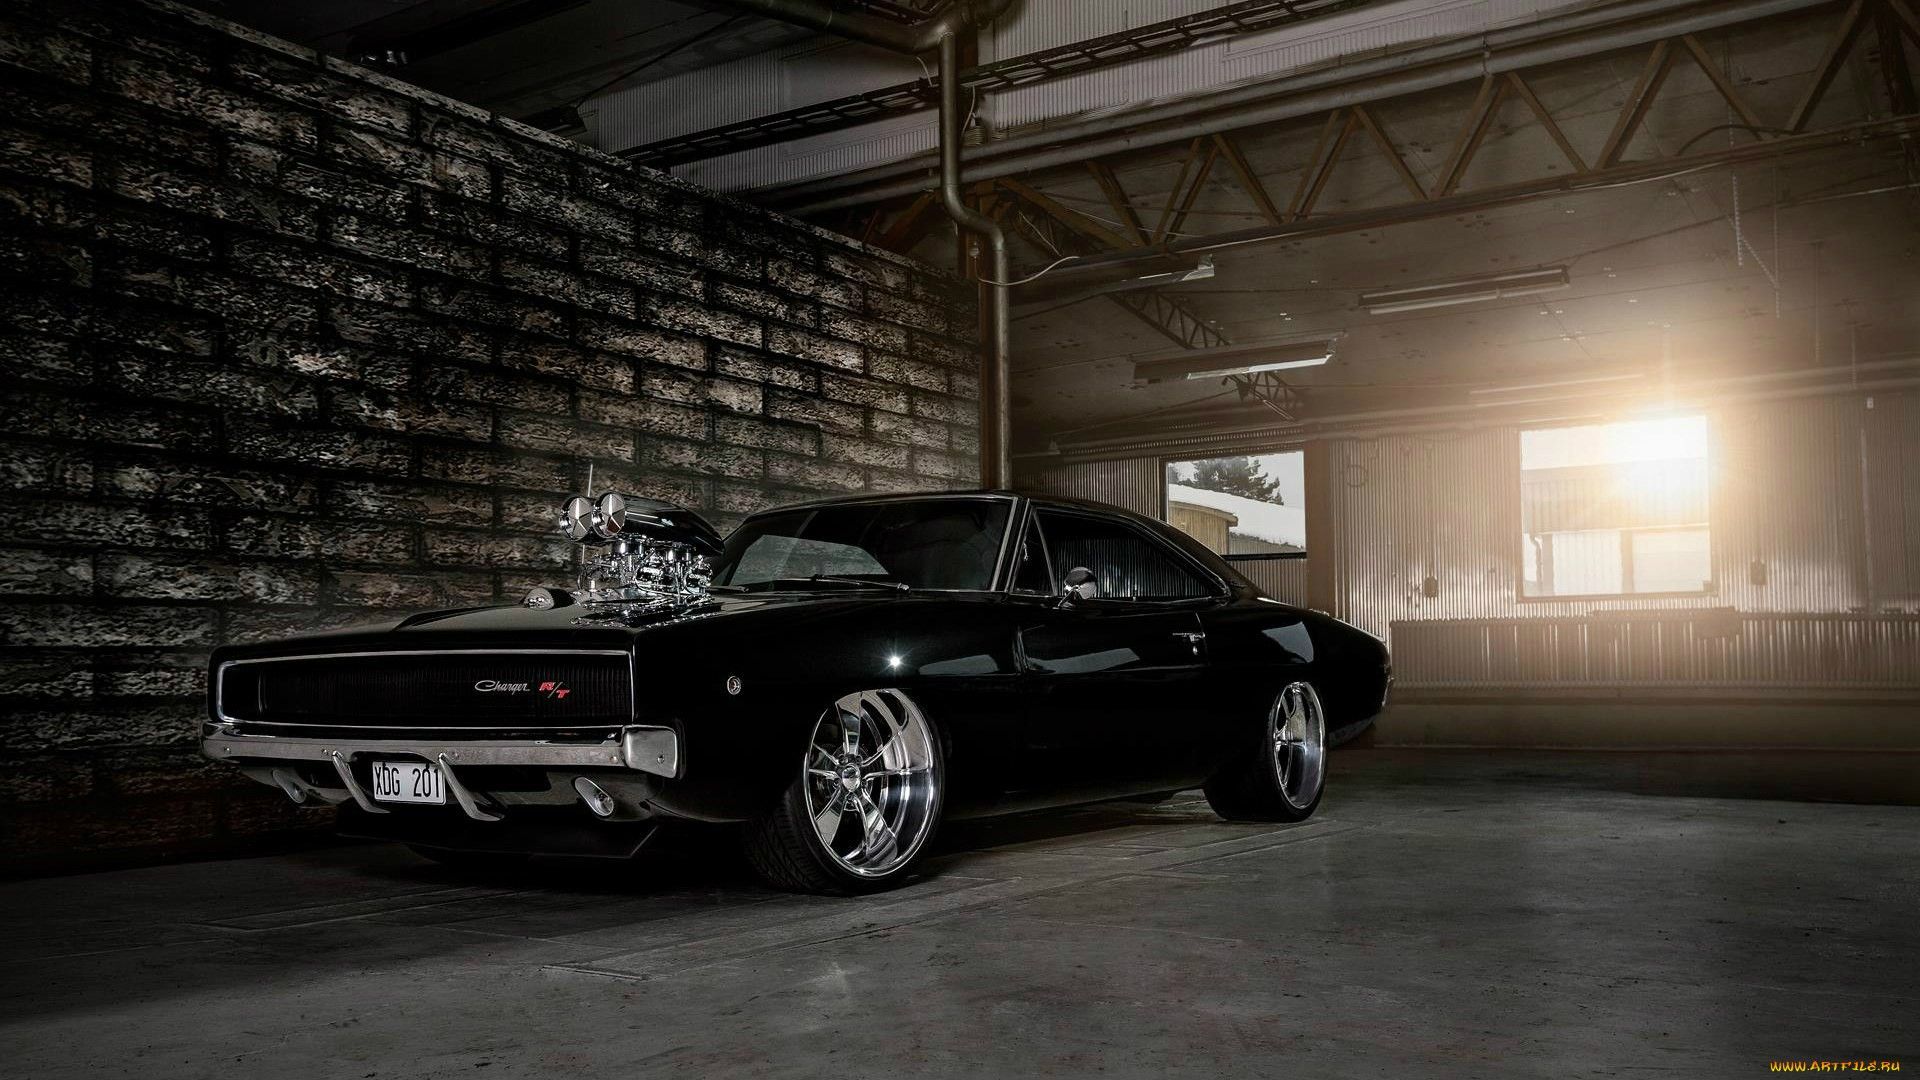 Dodge Charger Musclecars Cars And Trucks I Like Old Or